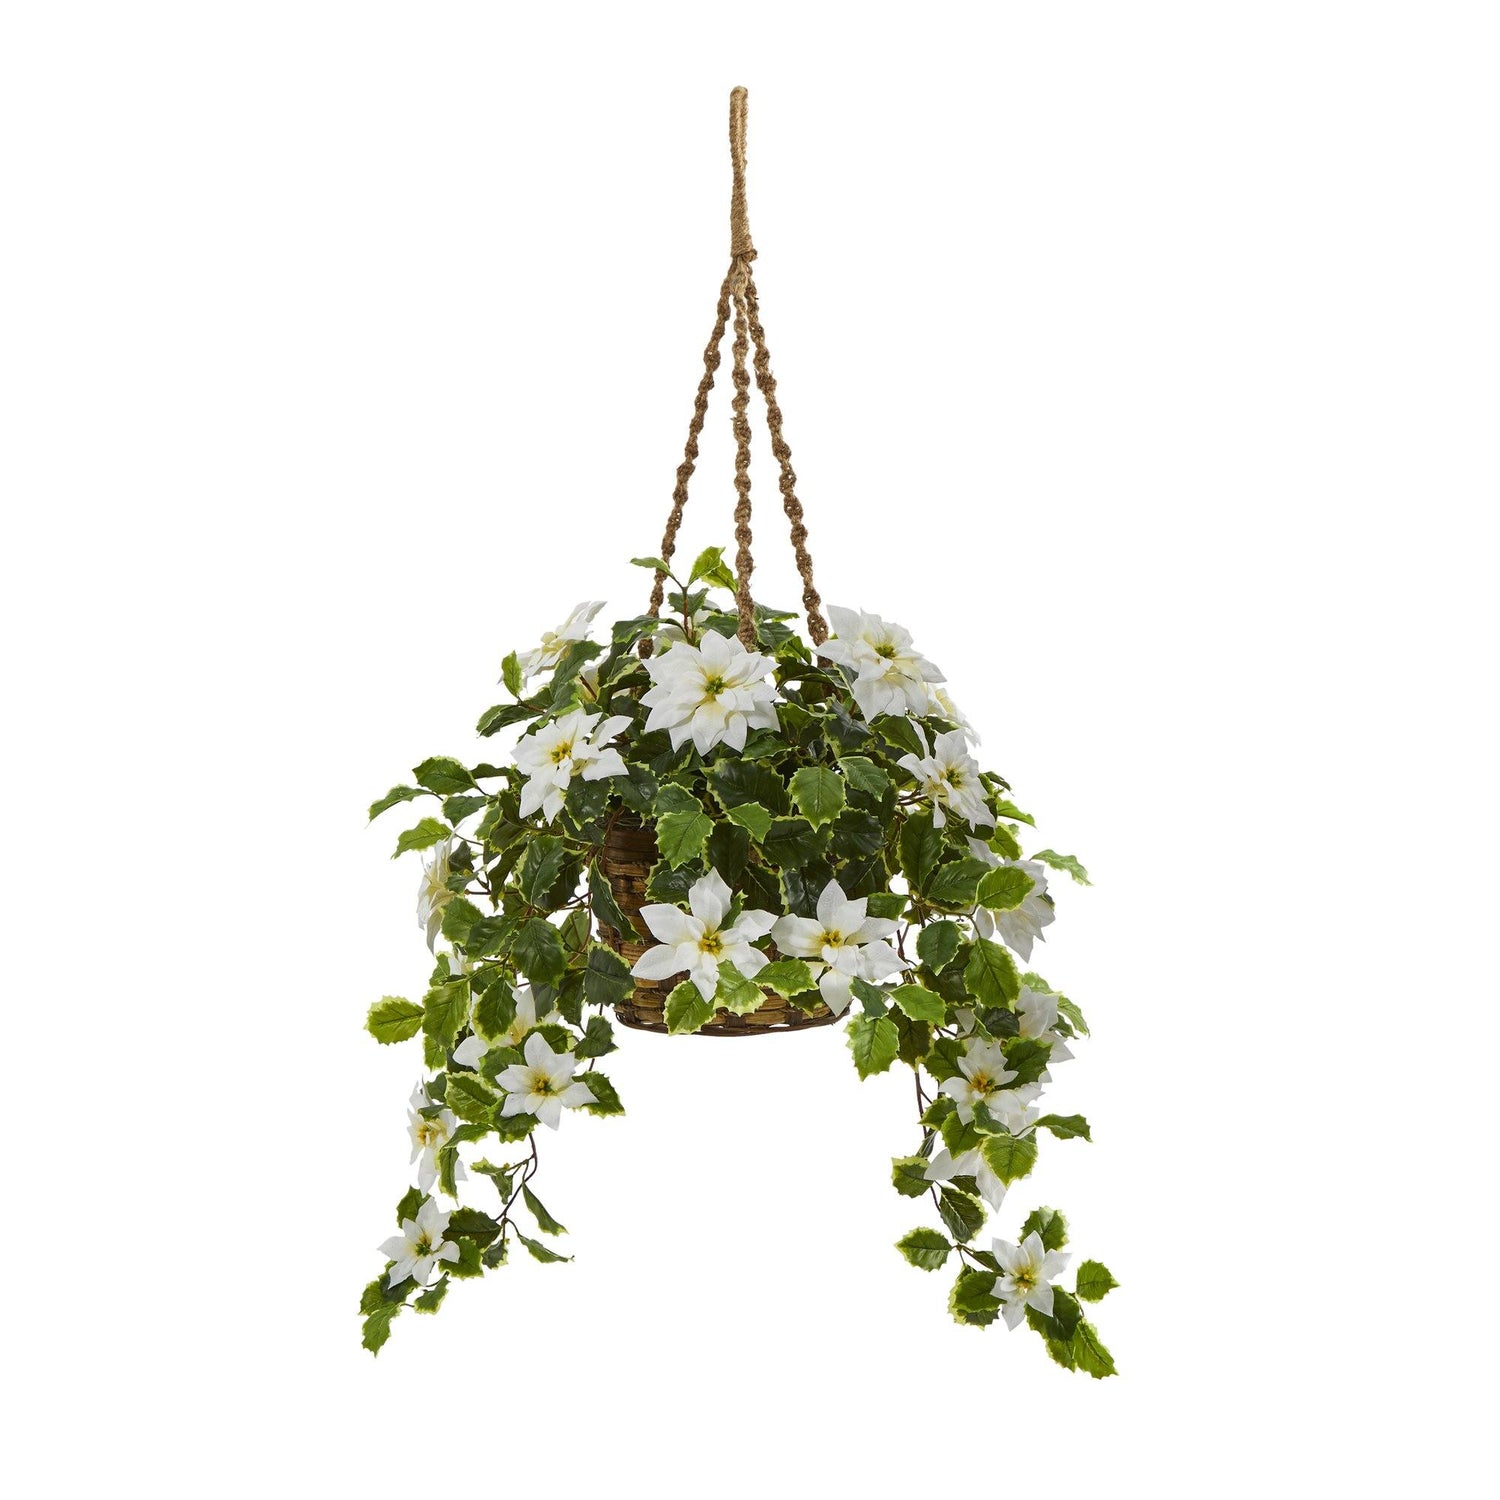 3.5’ Poinsettia and Variegated Holly Artificial Plant in Hanging Basket (Real Touch)